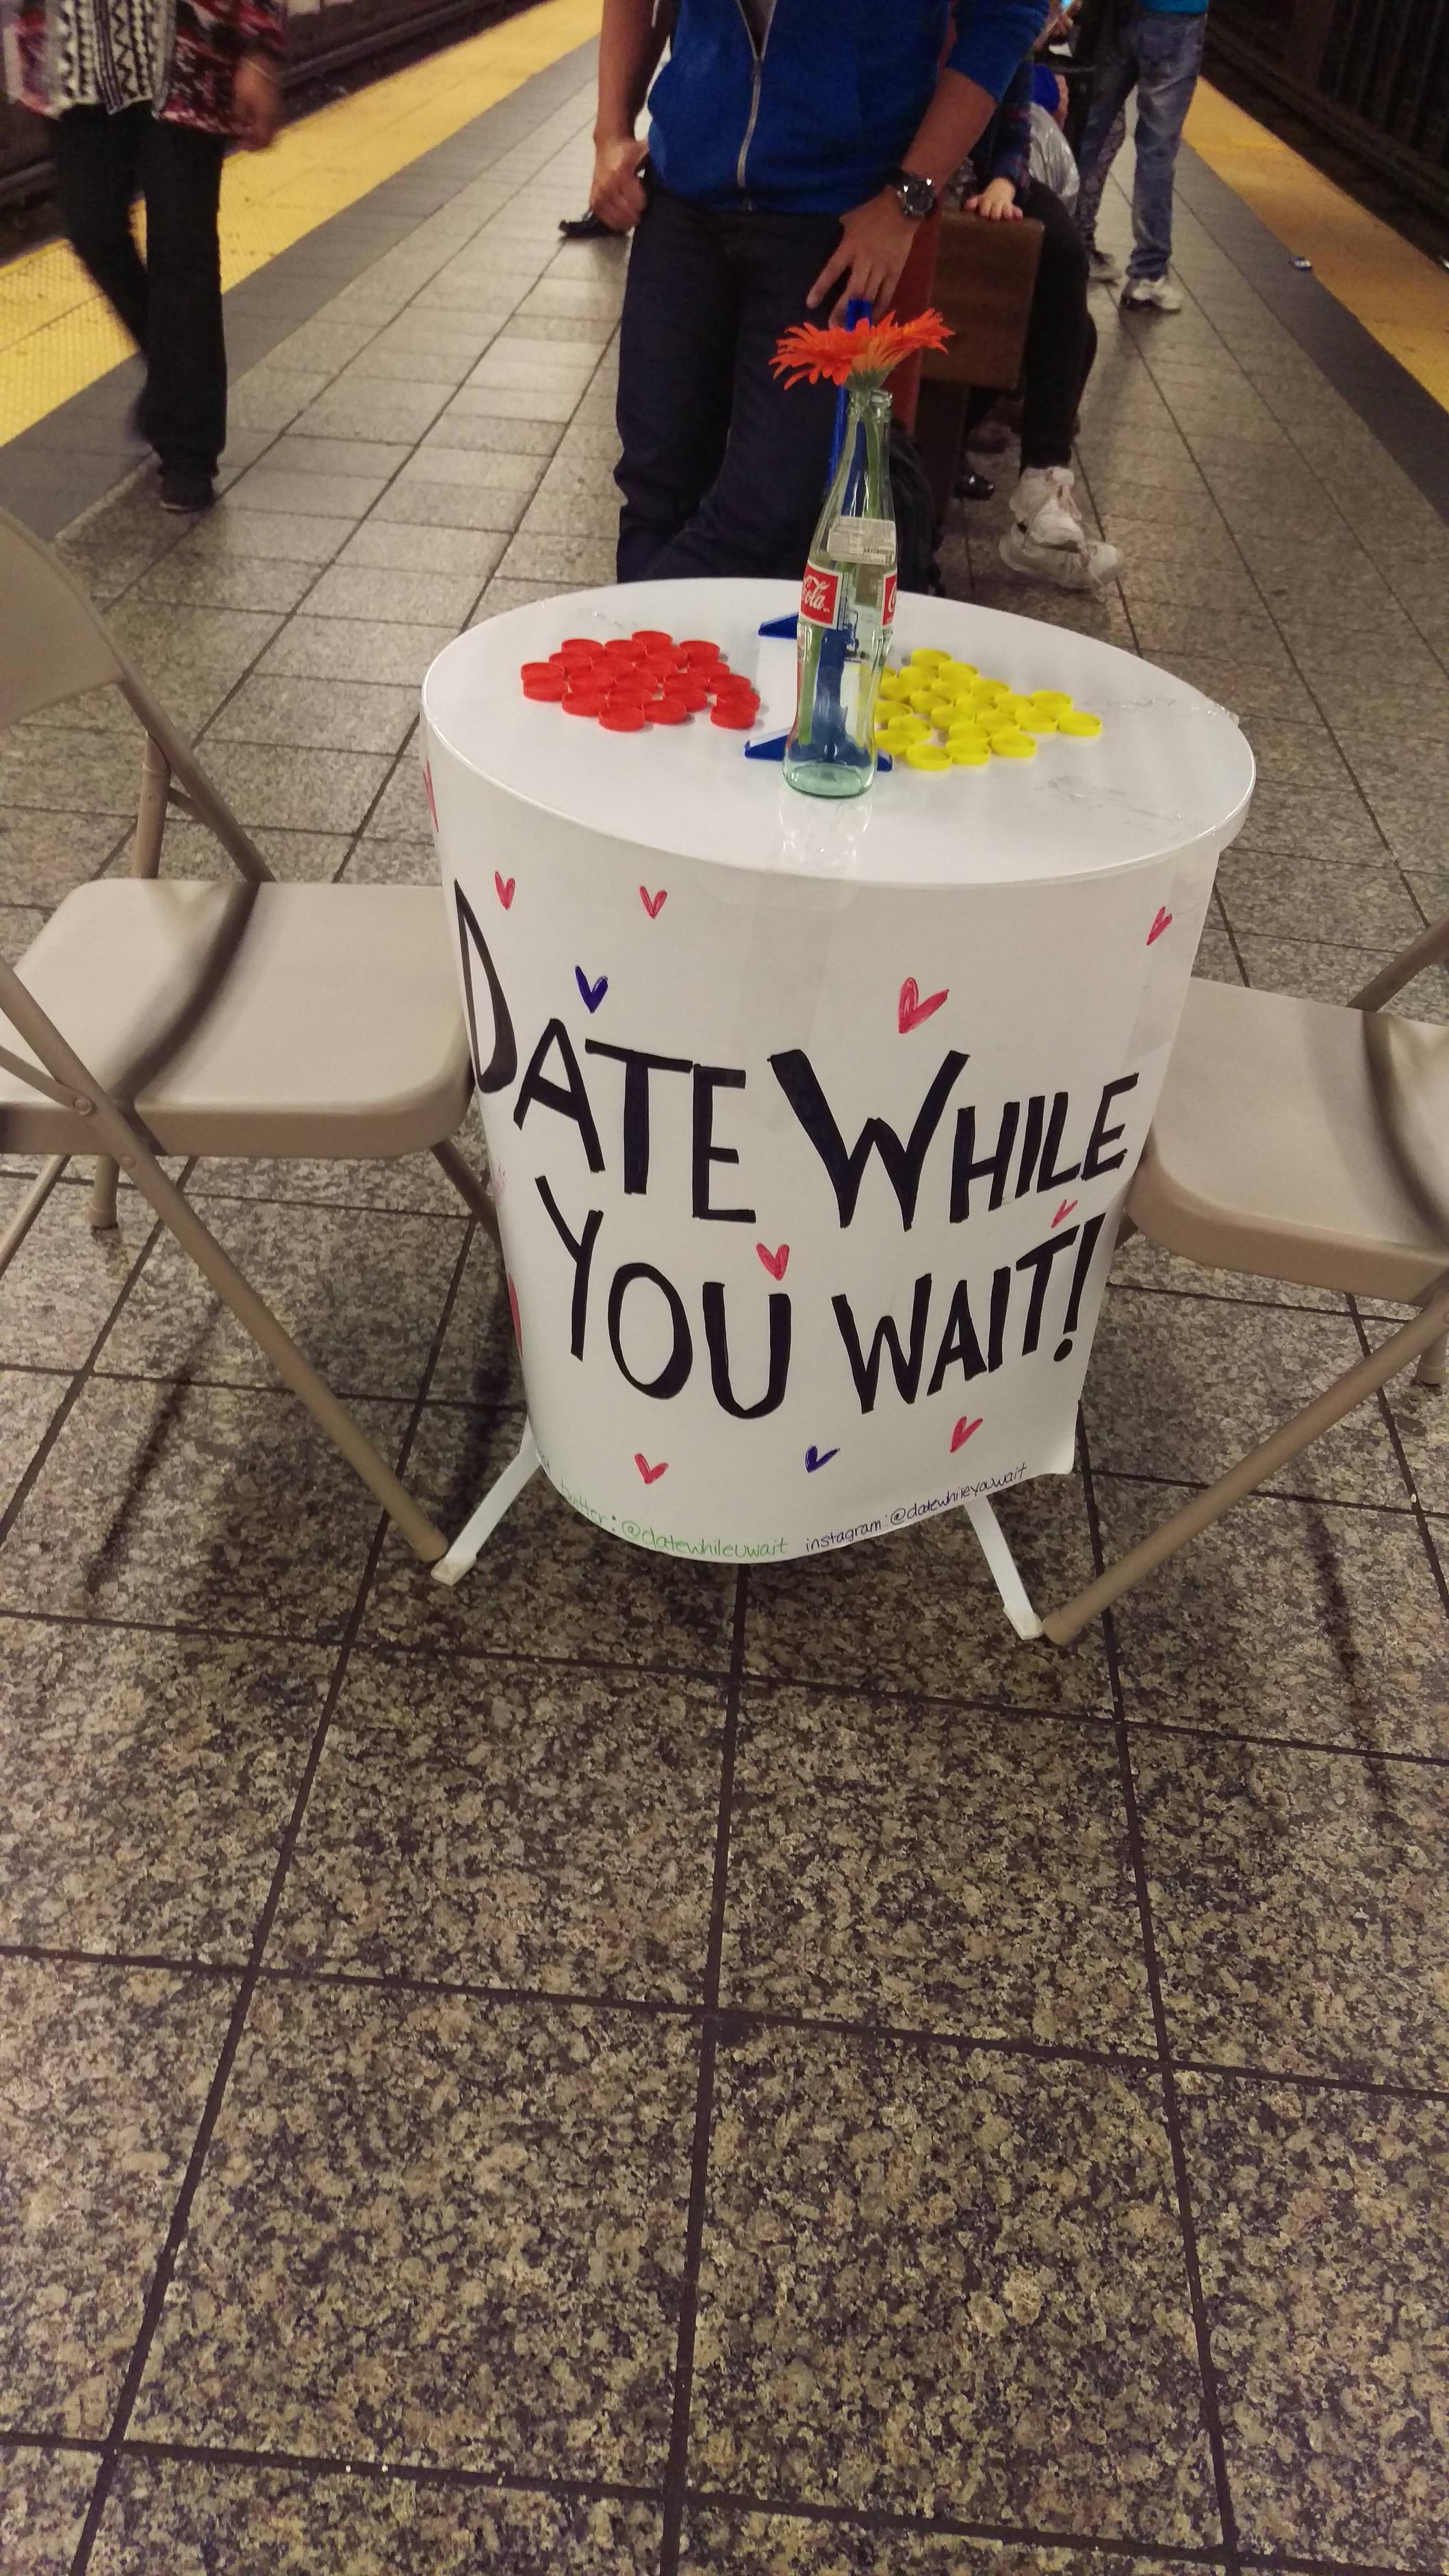 This subway platform has speed dating to keep you busy while you 

wait.